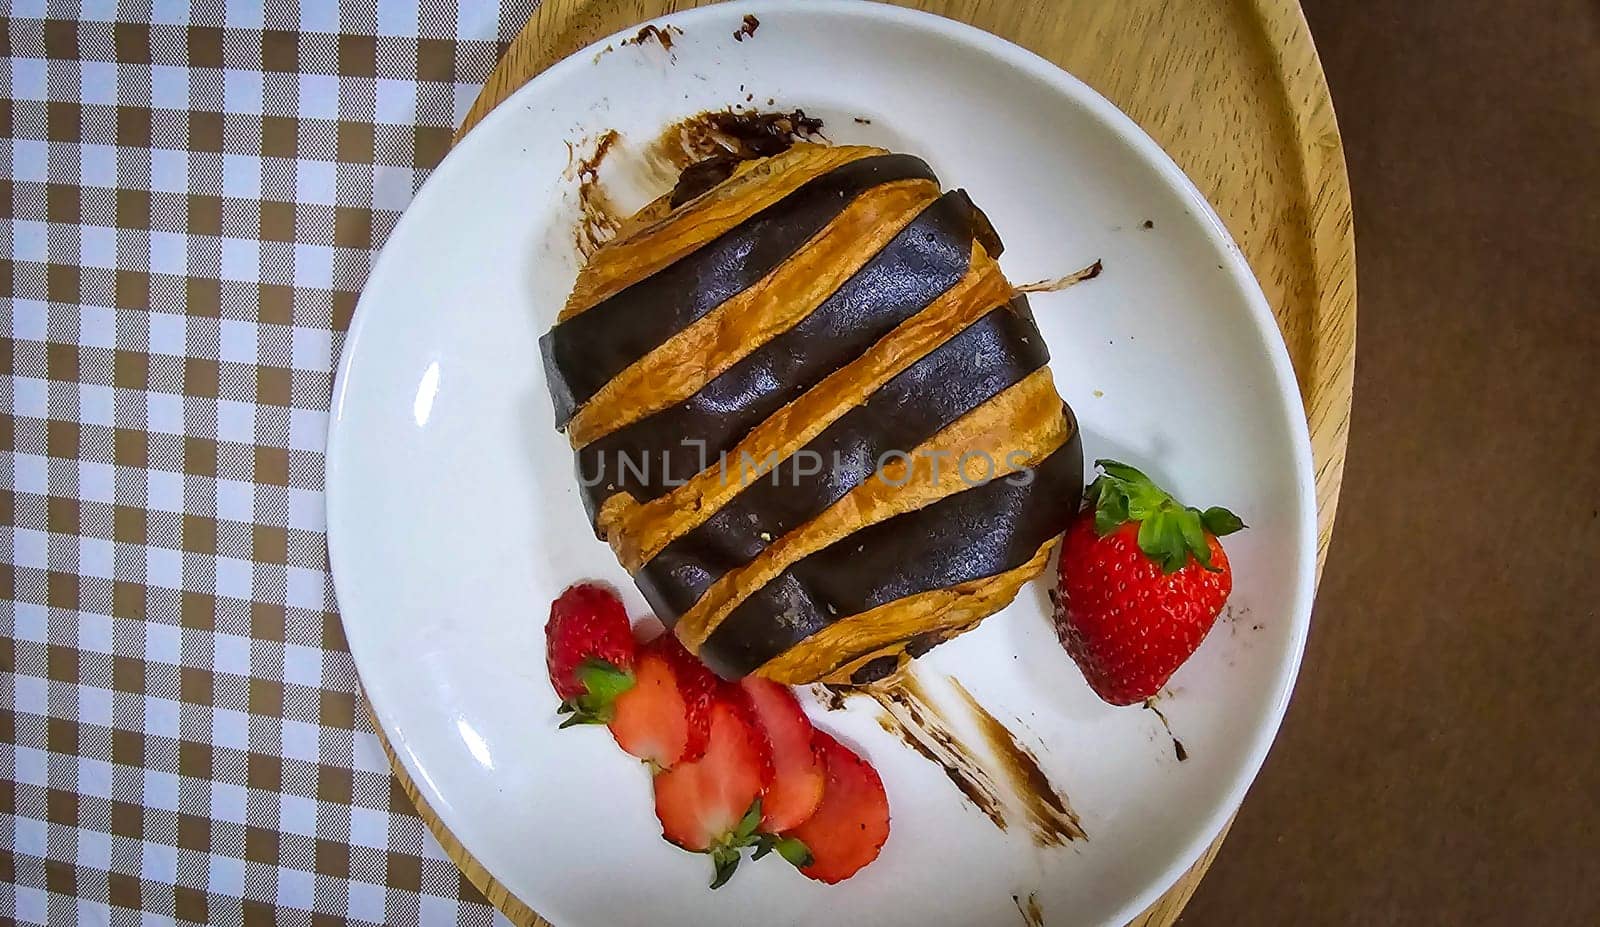 Fresh homemade striped chocolate croissant with chocolate filling on a round white plate, served with fresh strawberry by antoksena